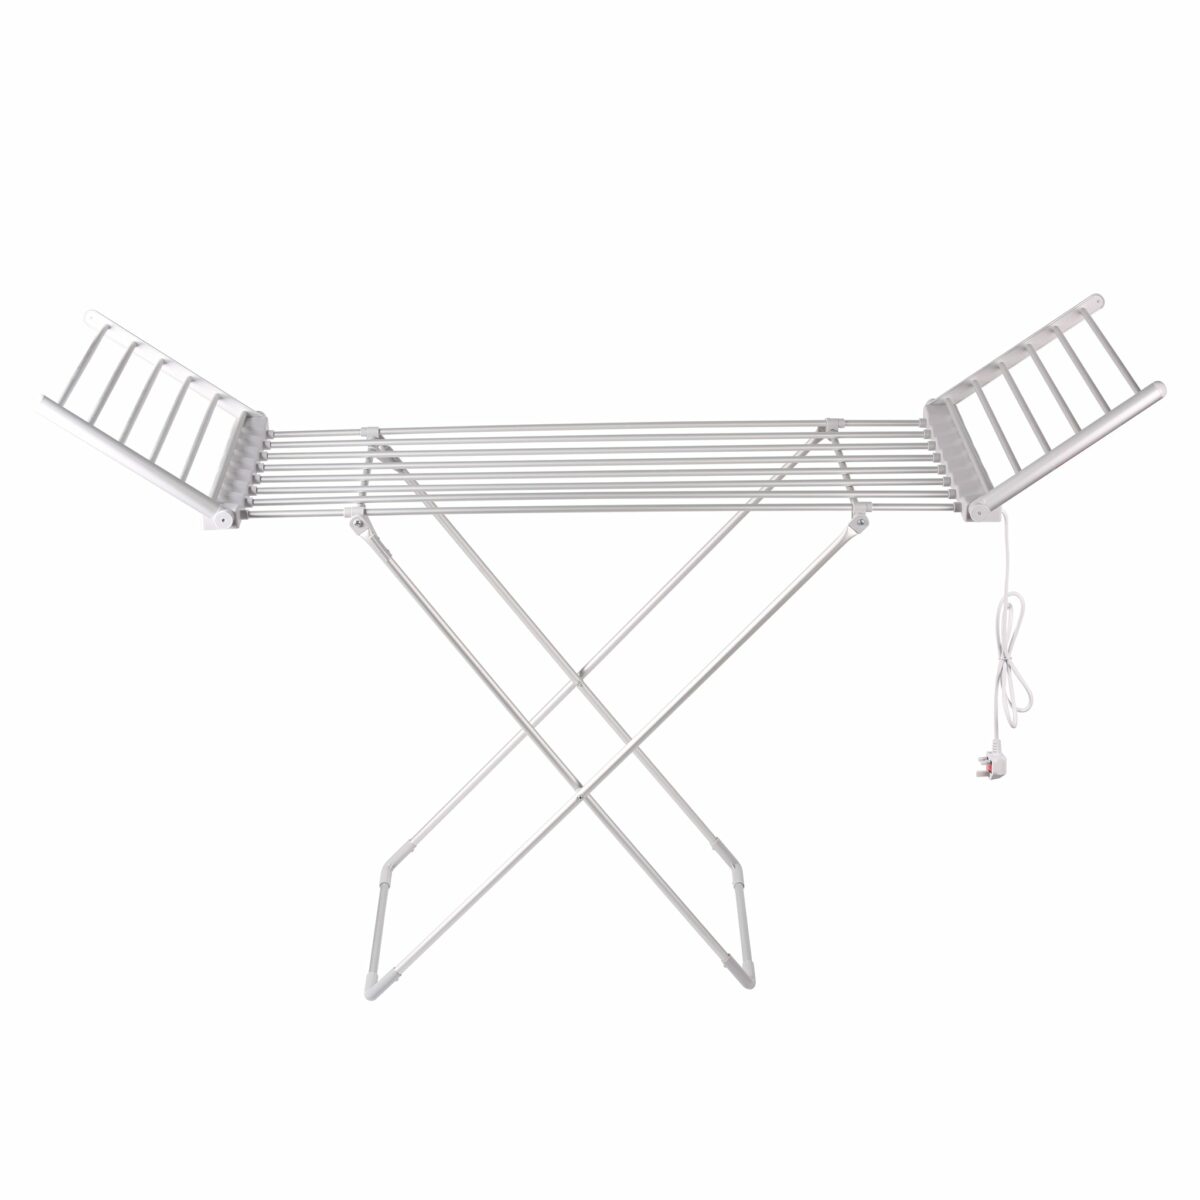 Heated Clothes Airer Drying Rack Electric 12m - ABIS